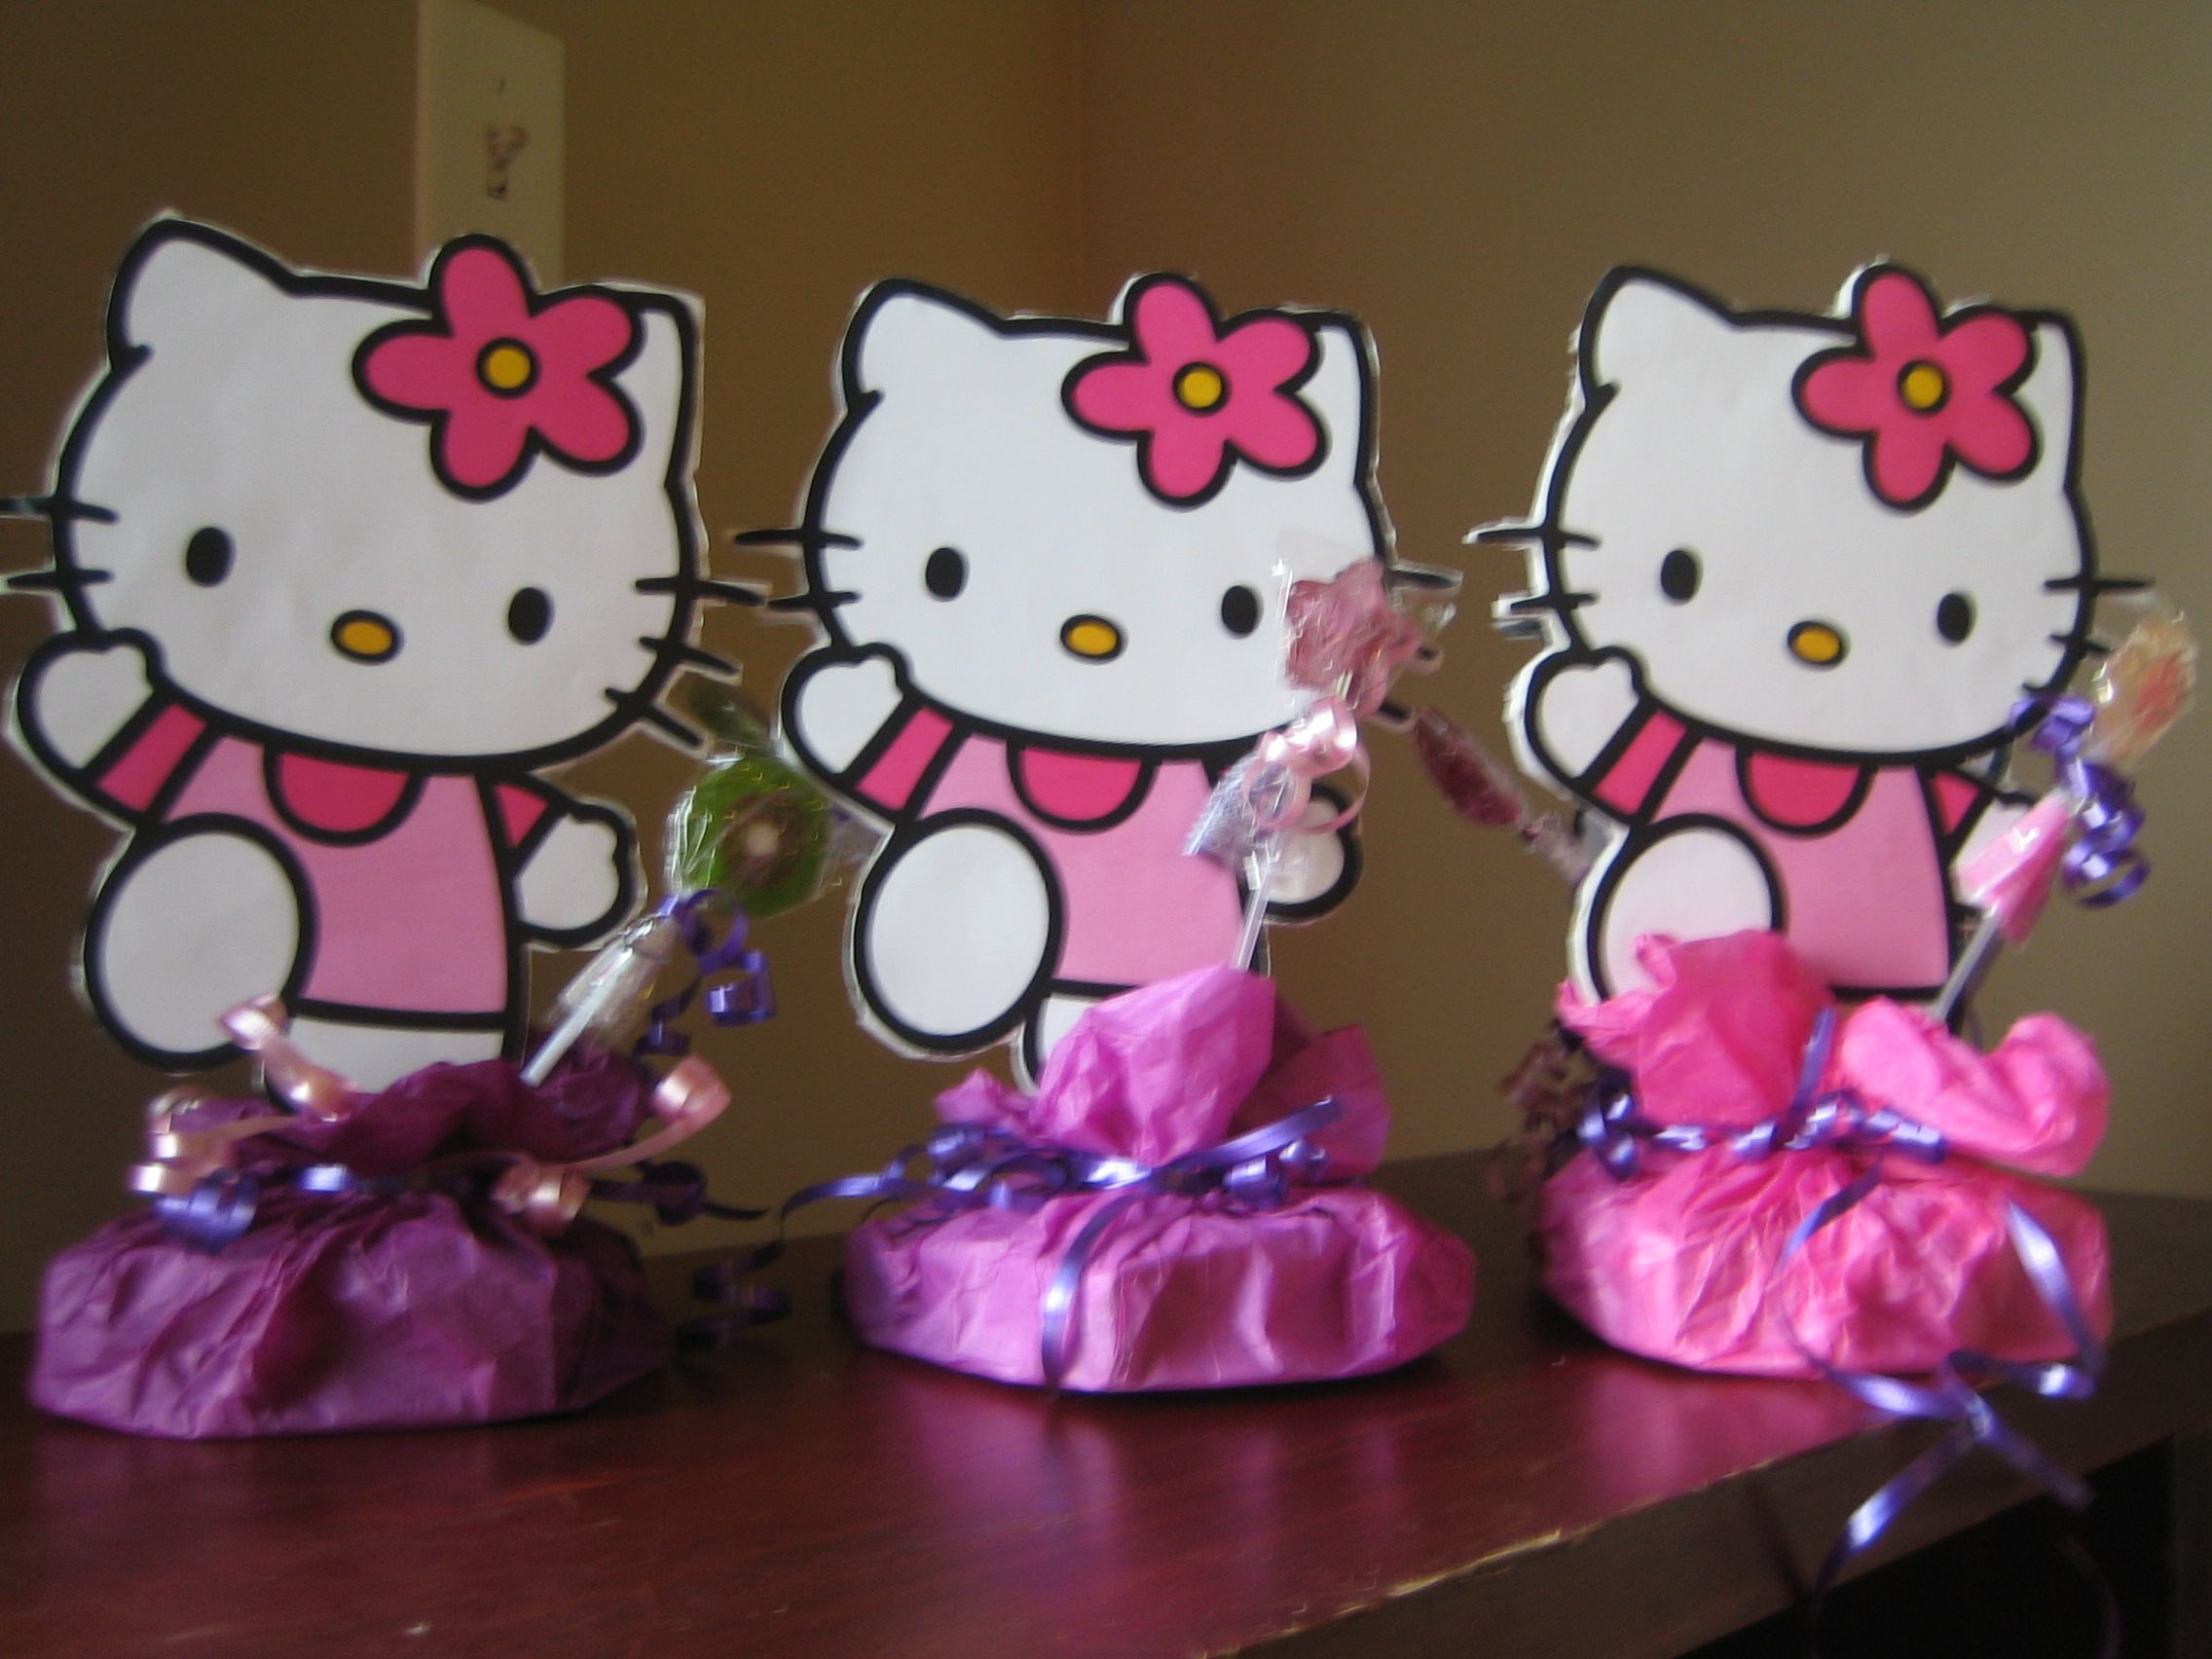 Hello Kitty Baby Shower Decorations At Party City
 hello kitty baby shower decorations